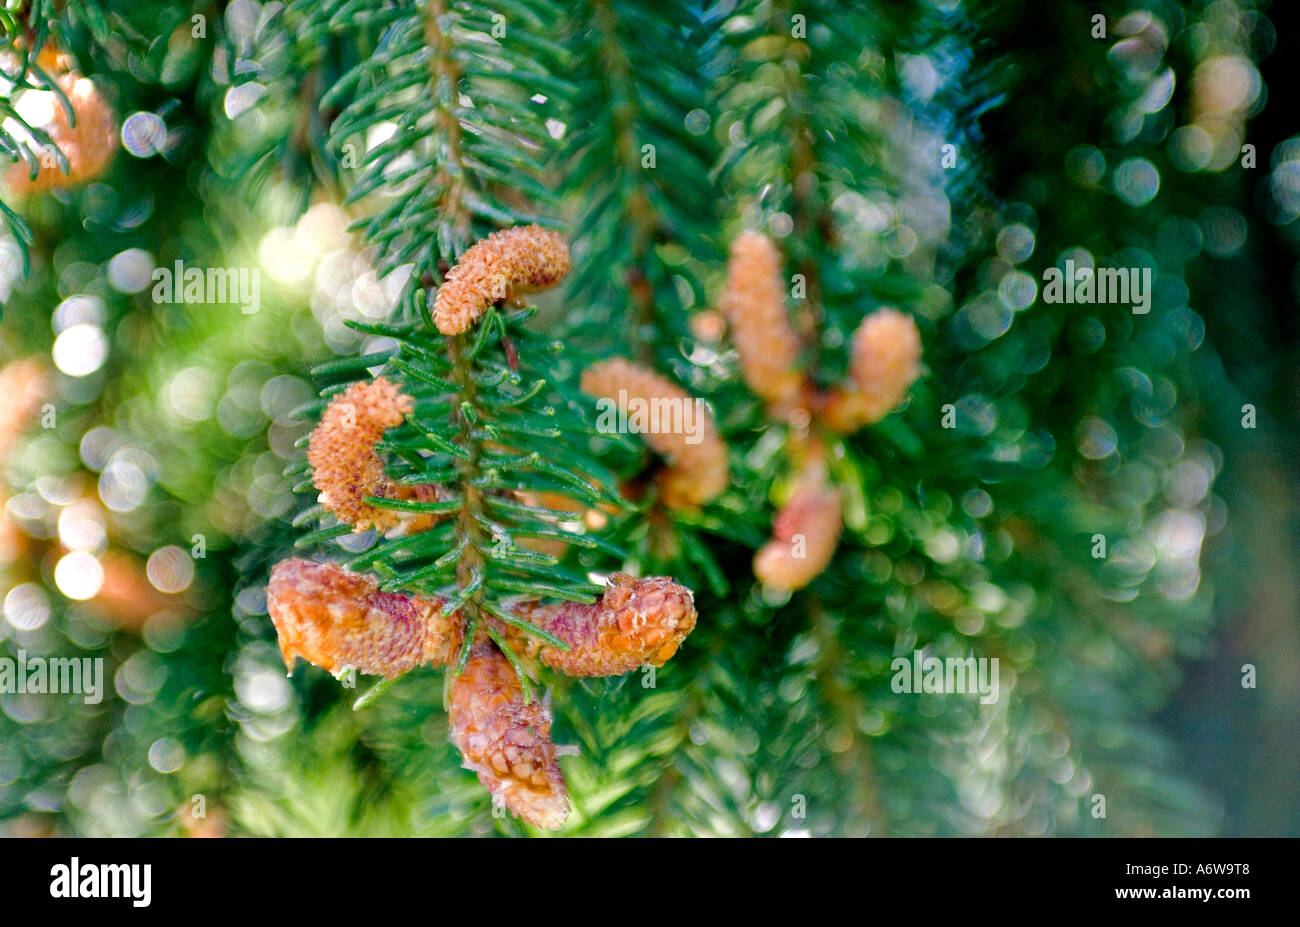 PICEA ABIES (CHRISTMAS TREE) SHEDDING POLLEN Stock Photo